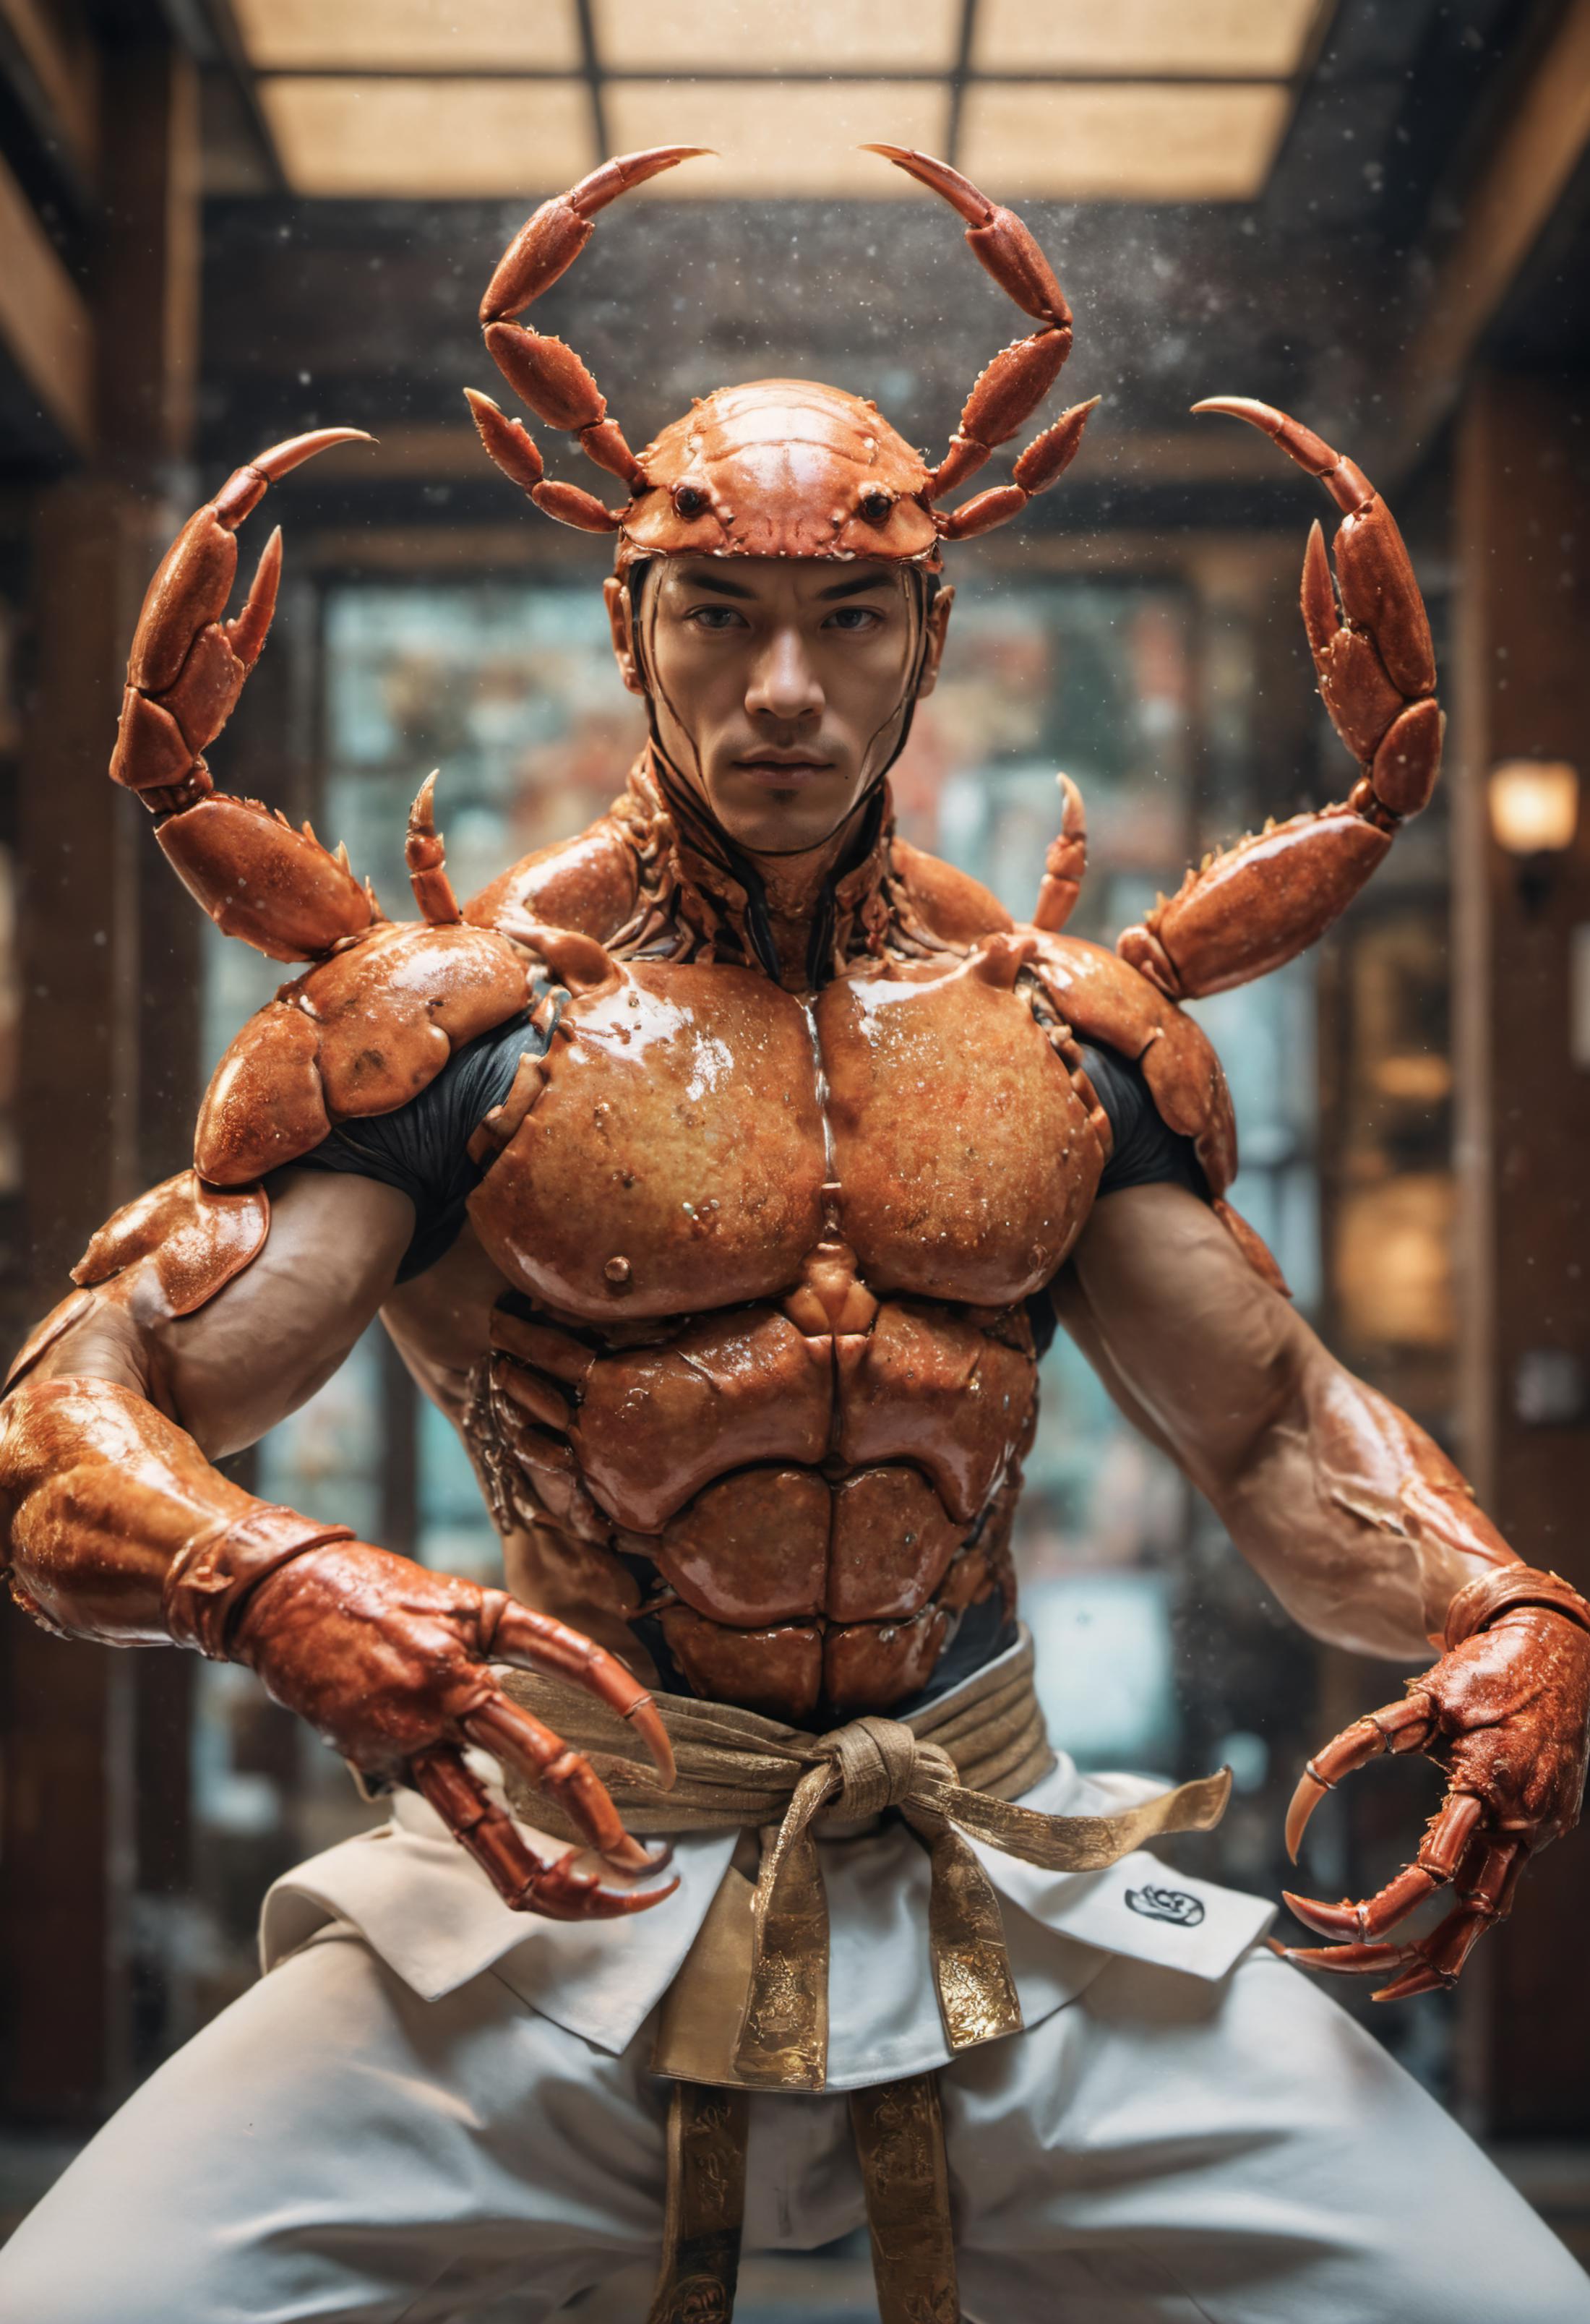 A man wearing a crab costume with a belt in a room.